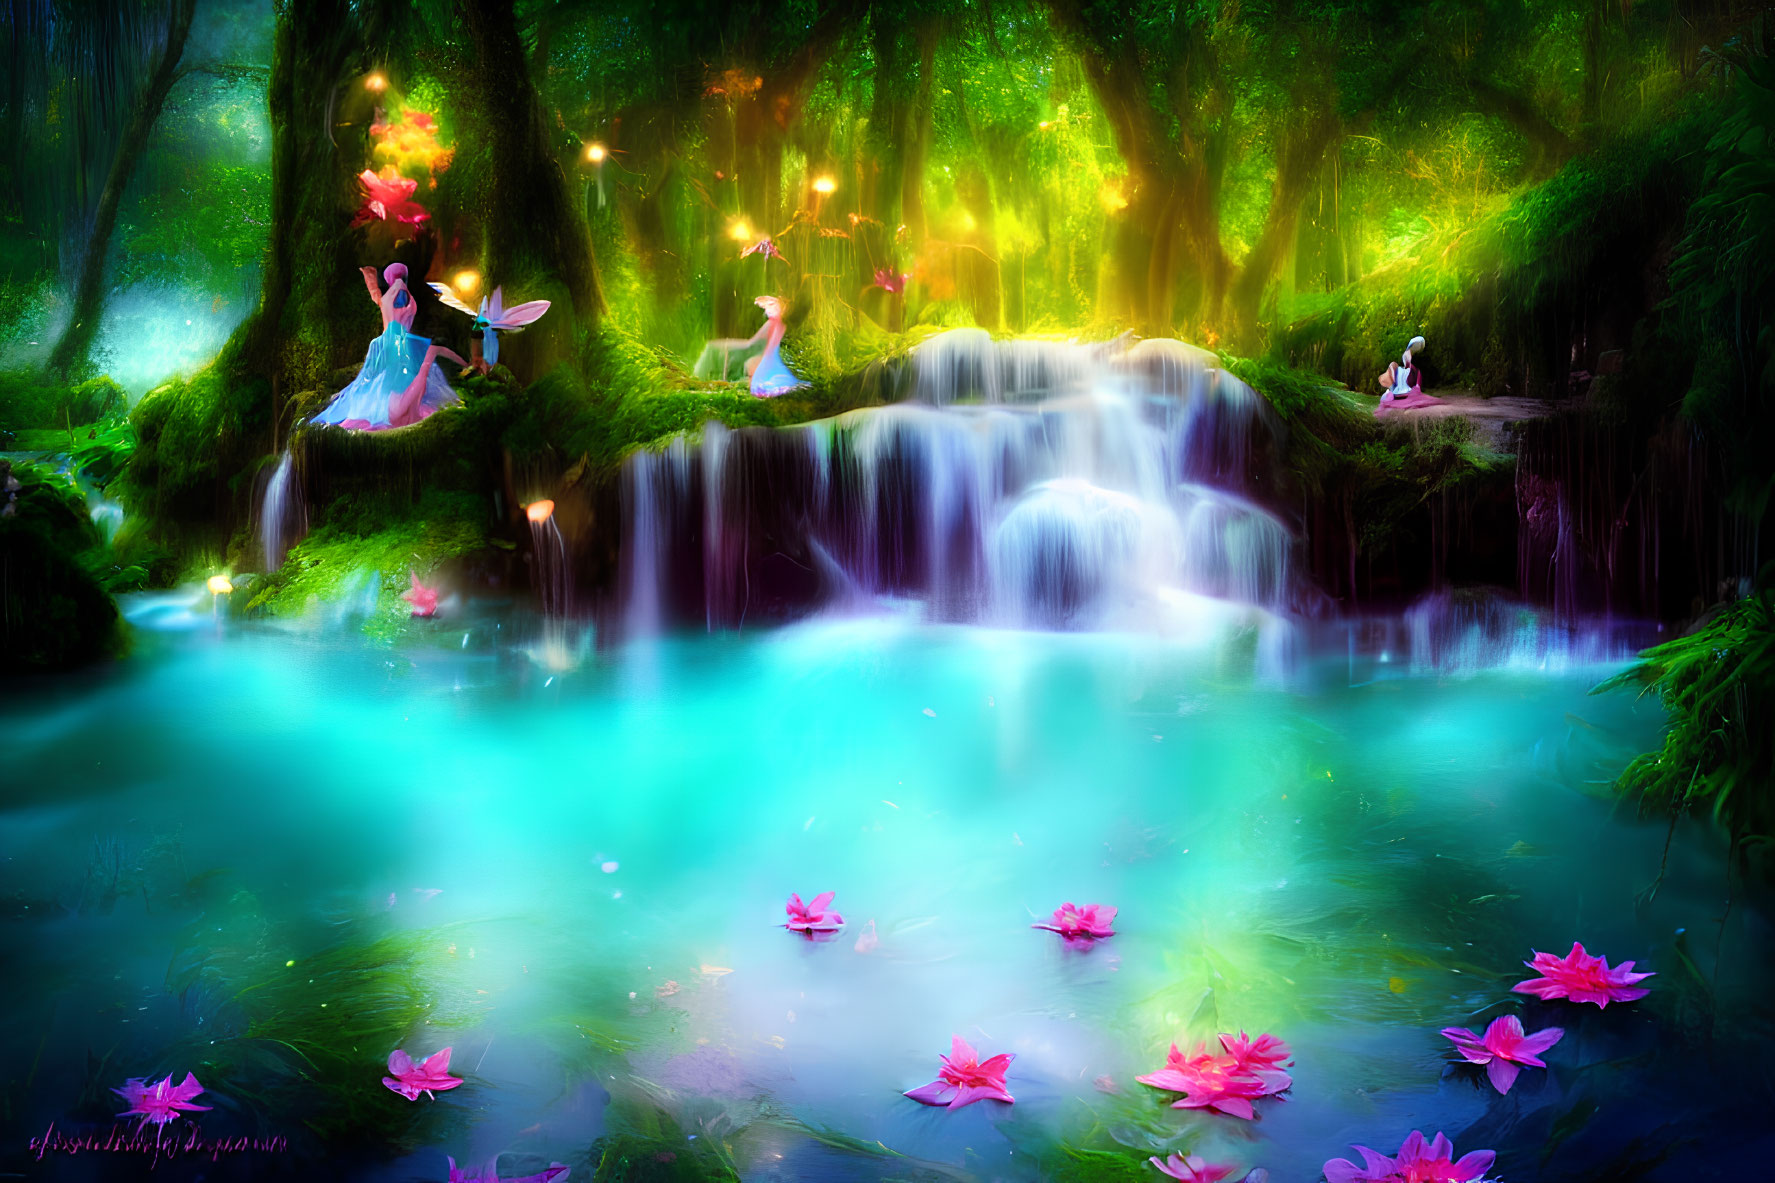 Fantasy Landscape with Waterfalls, Glowing Forest, and Figures in Flowing Dresses